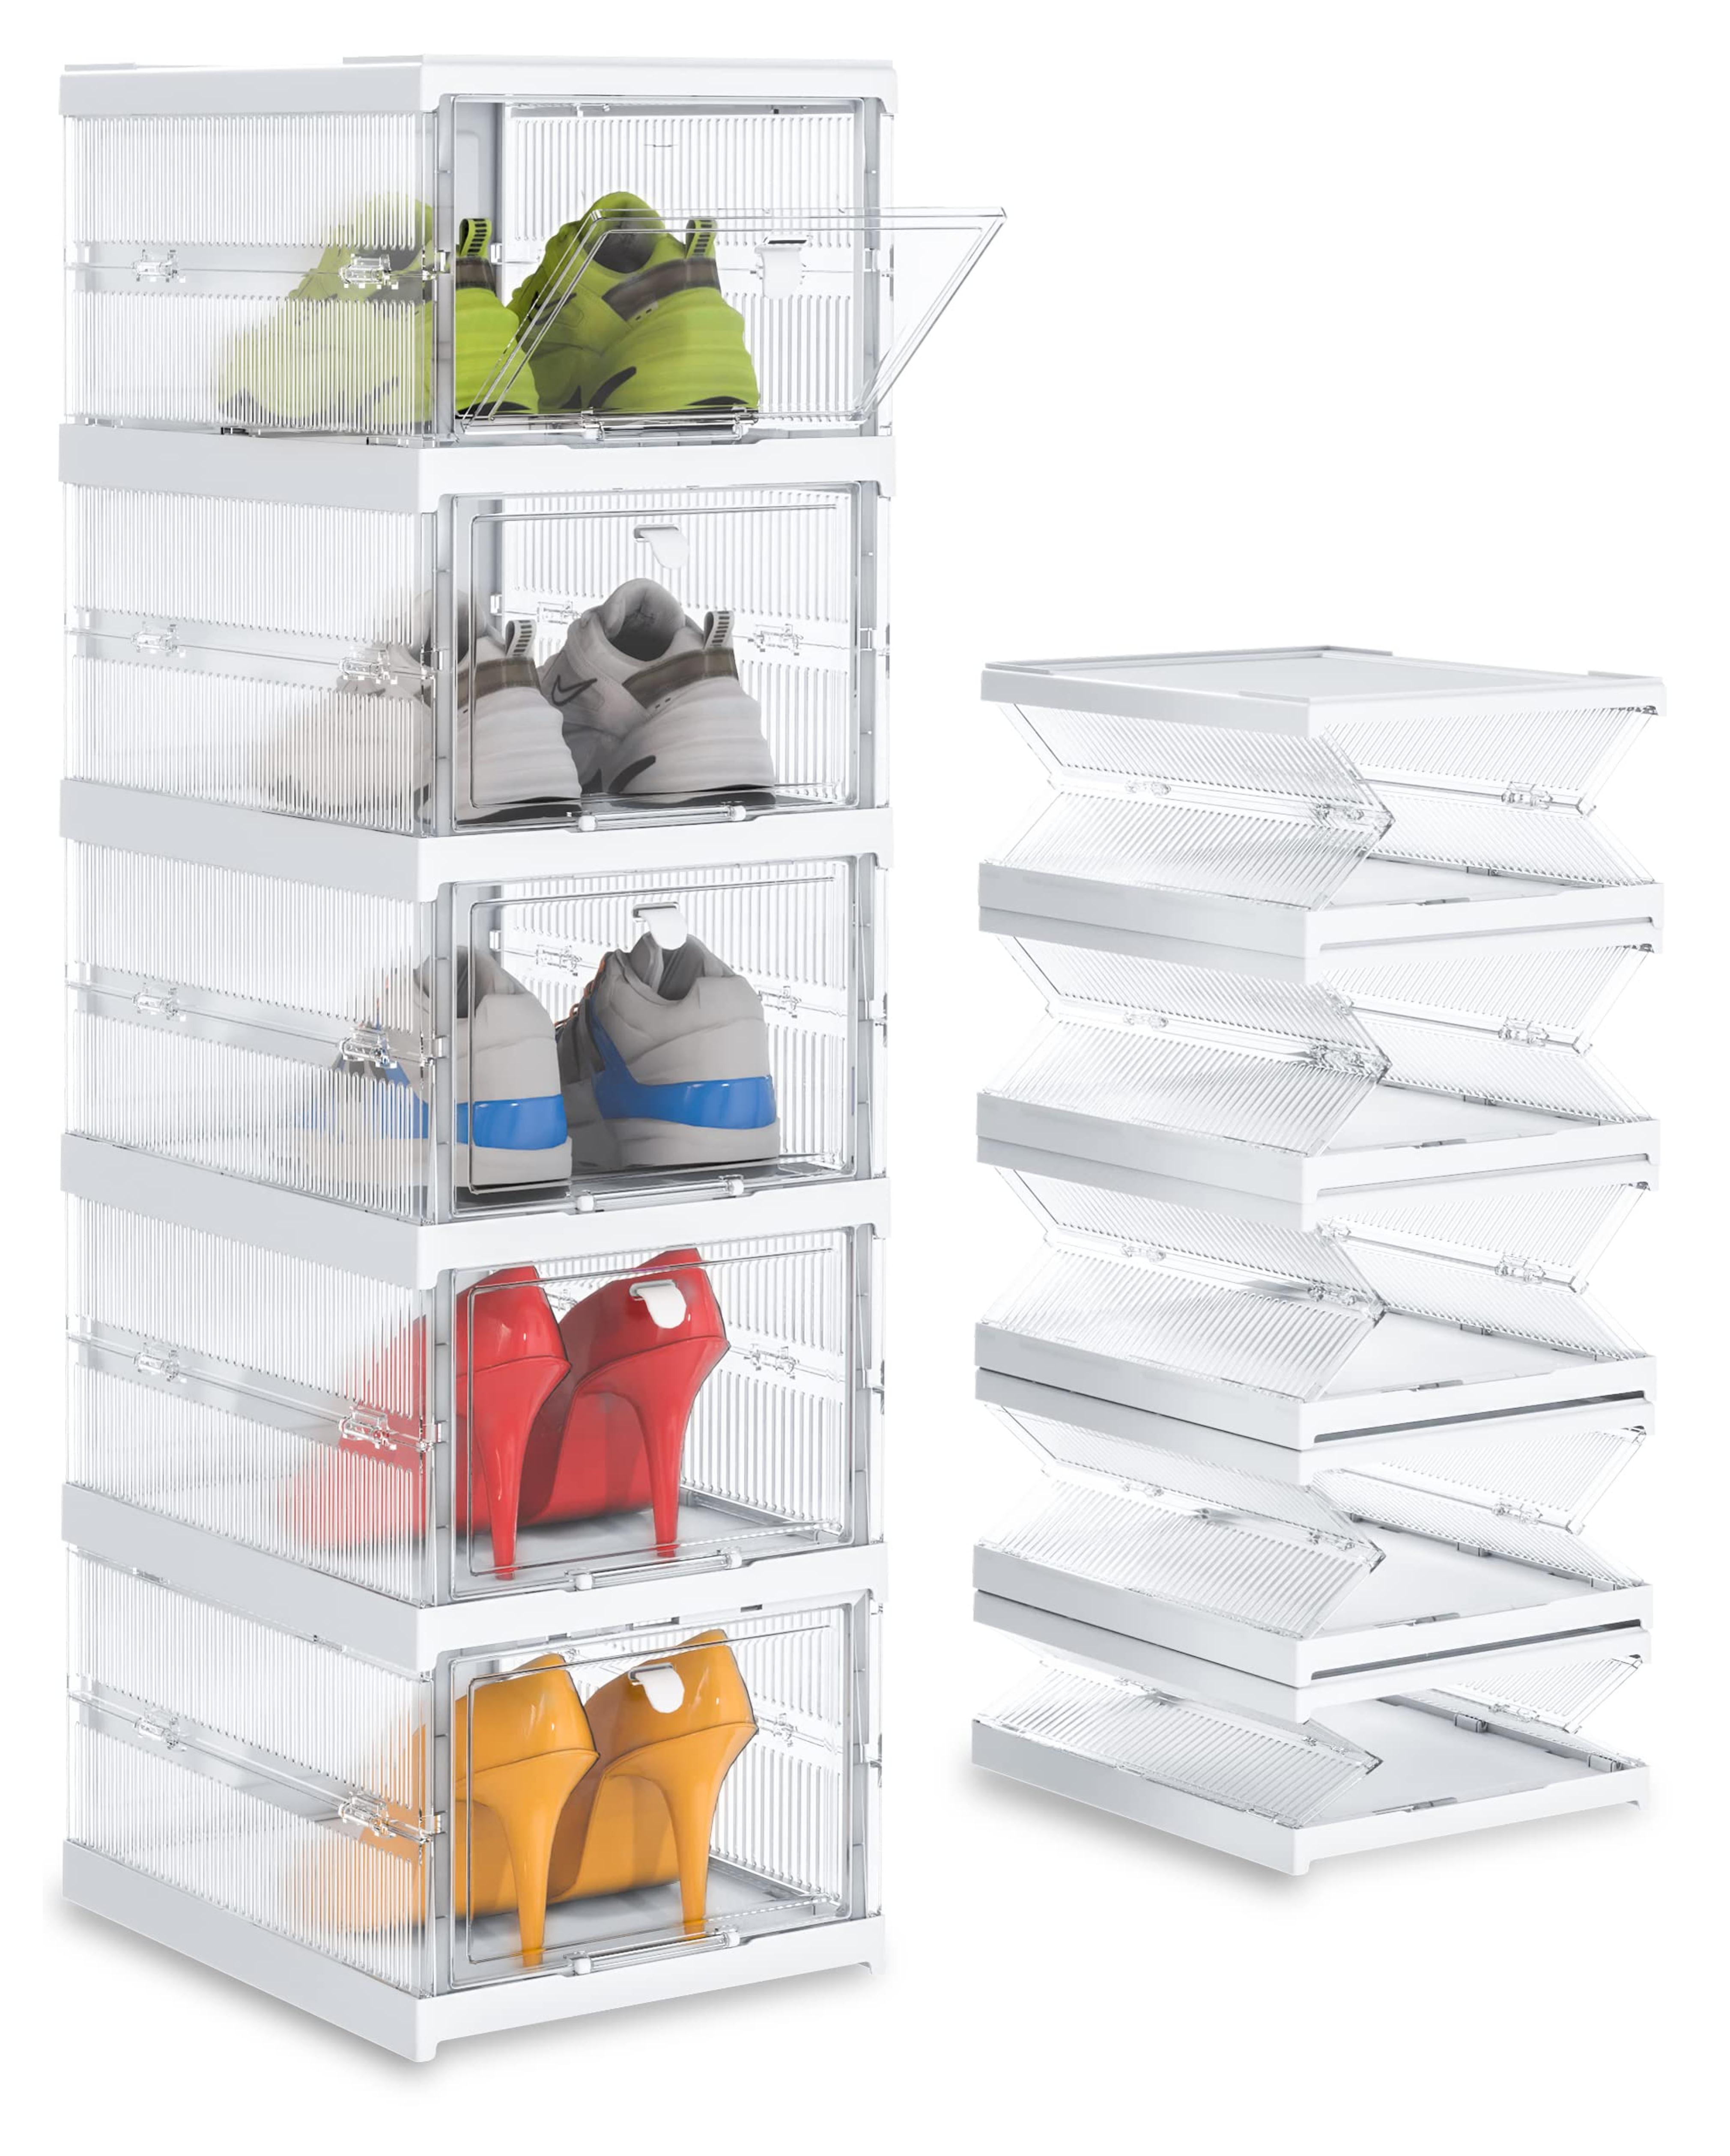 Amazon.com: Solid Plastic Not Flimsy 5 Layers Foldable Shoe Storage Boxes or Sneaker Storage Boxes - Easy Installation- All-in-One Clear Shoe Box with Doors - Space Saving Shoe Boxes or Shoe Organizer By Utopia Home : Home & Kitchen